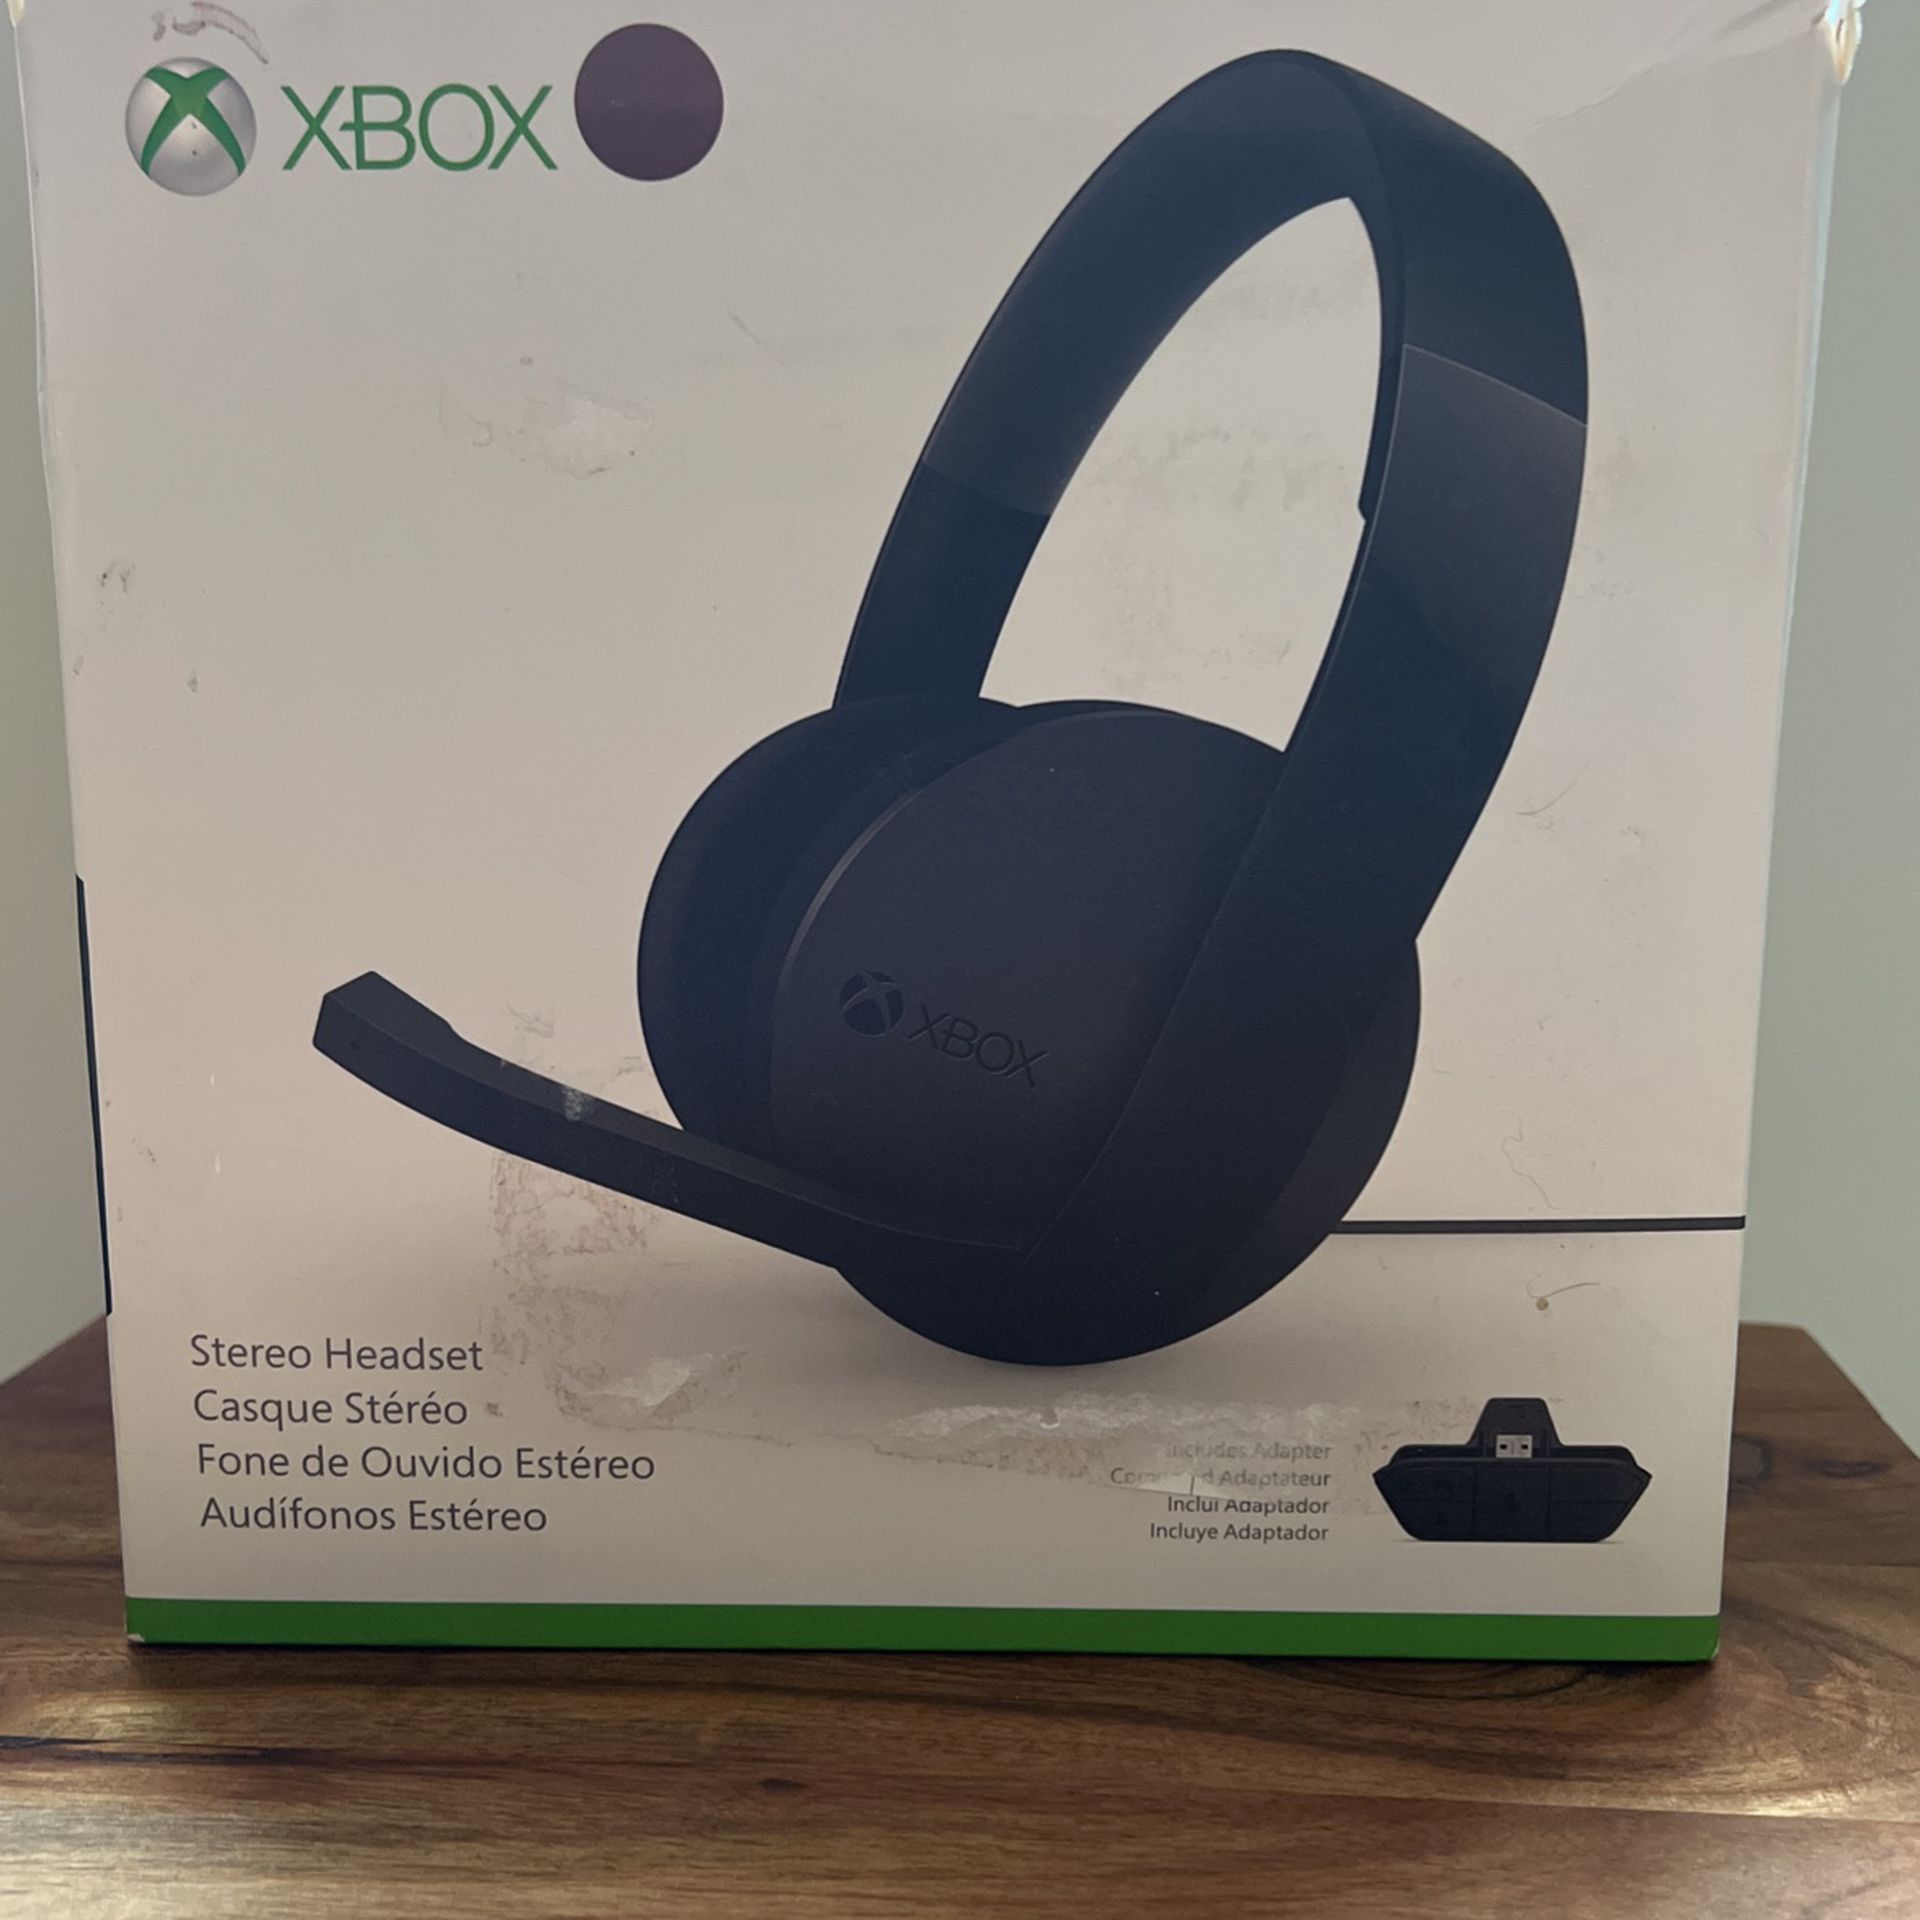 XBOX Stereo Headset with a USB Cable & a Stereo Headset Adapter